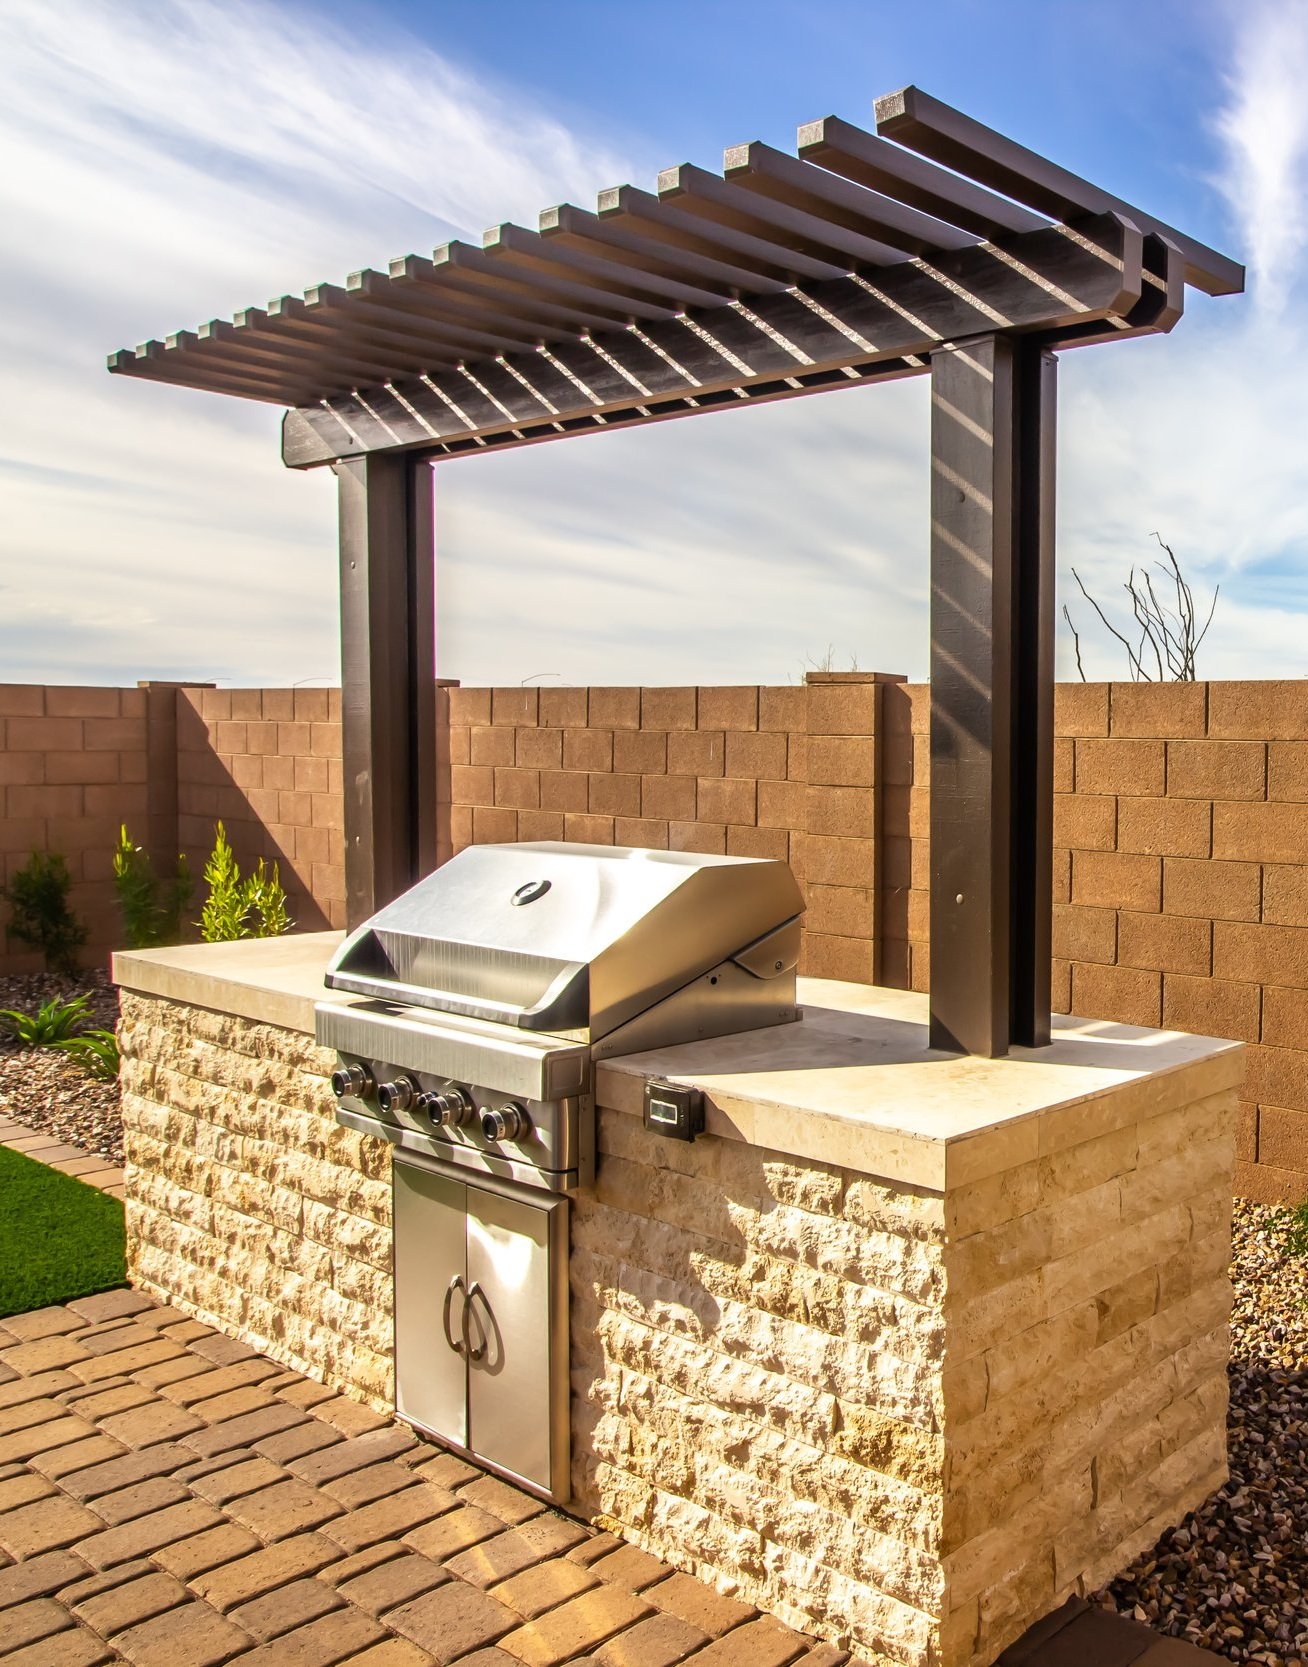 Outdoor Kitchen Countertop: Best Materials For Durability And Style